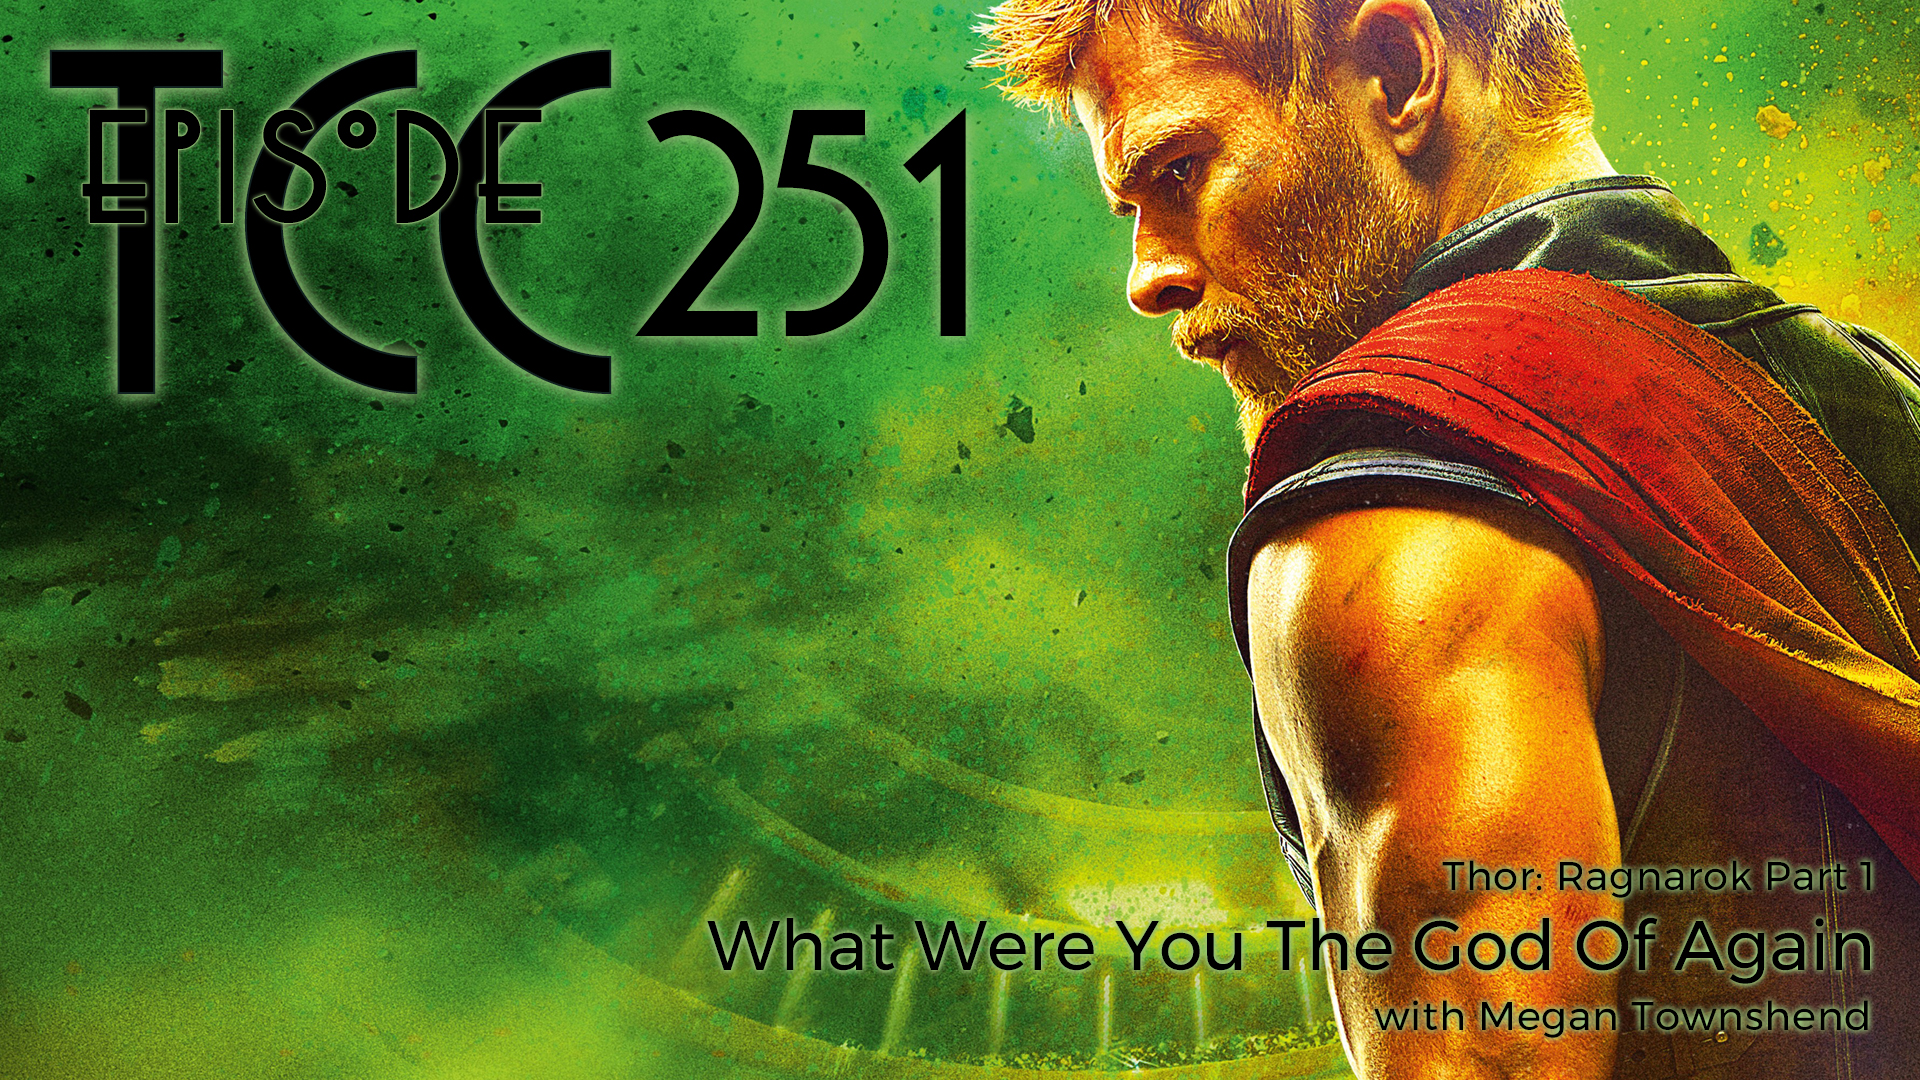 The Citadel Cafe 251: What Were You The God Of Again